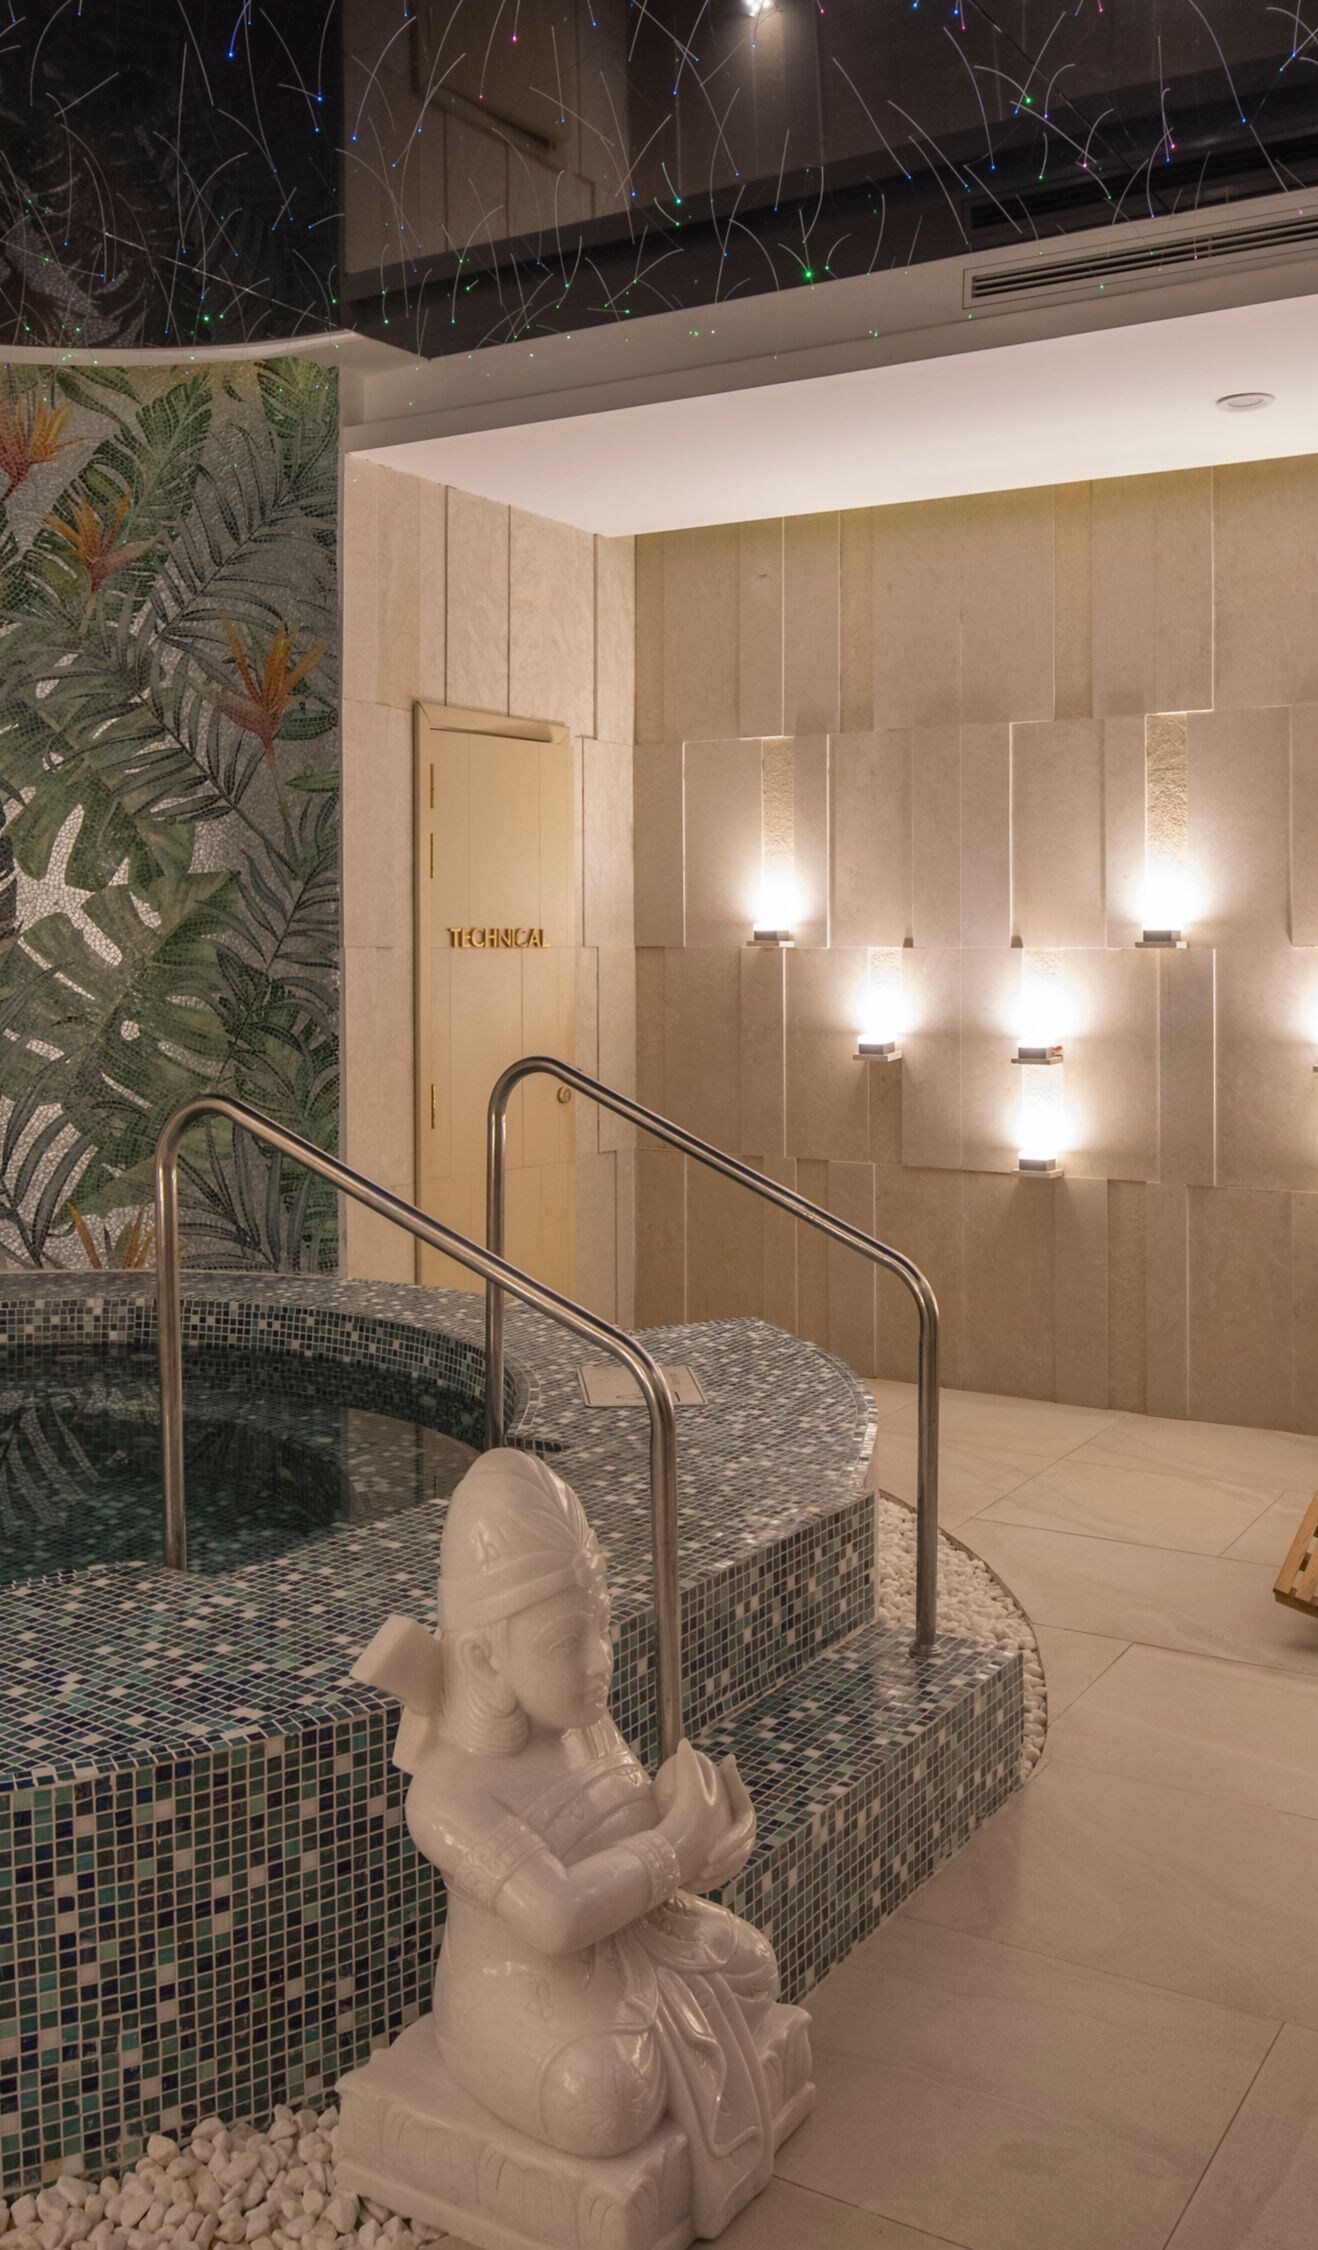 Soothe your senses at the spa’s Jacuzzi bath.